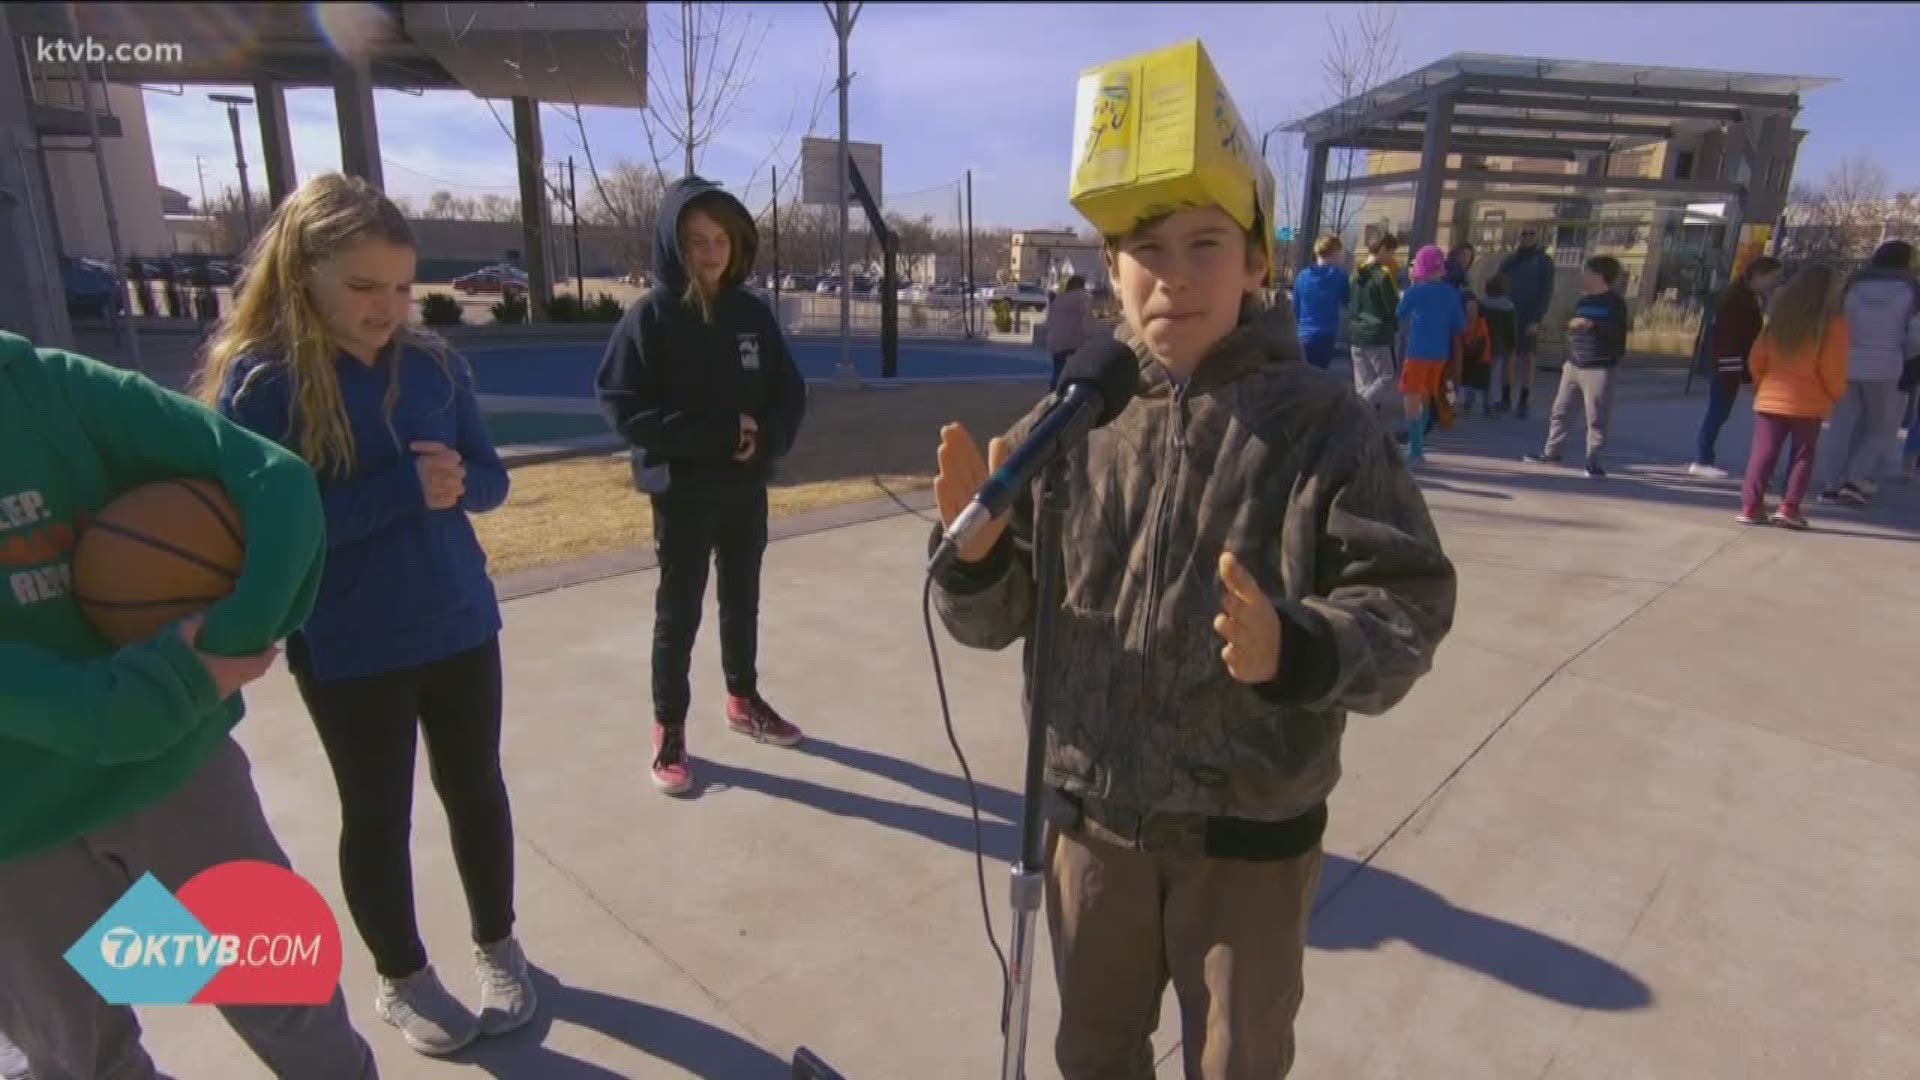 This edition is courtesy of Foothills School whose students got to spend their recess at JUMP in downtown Boise.